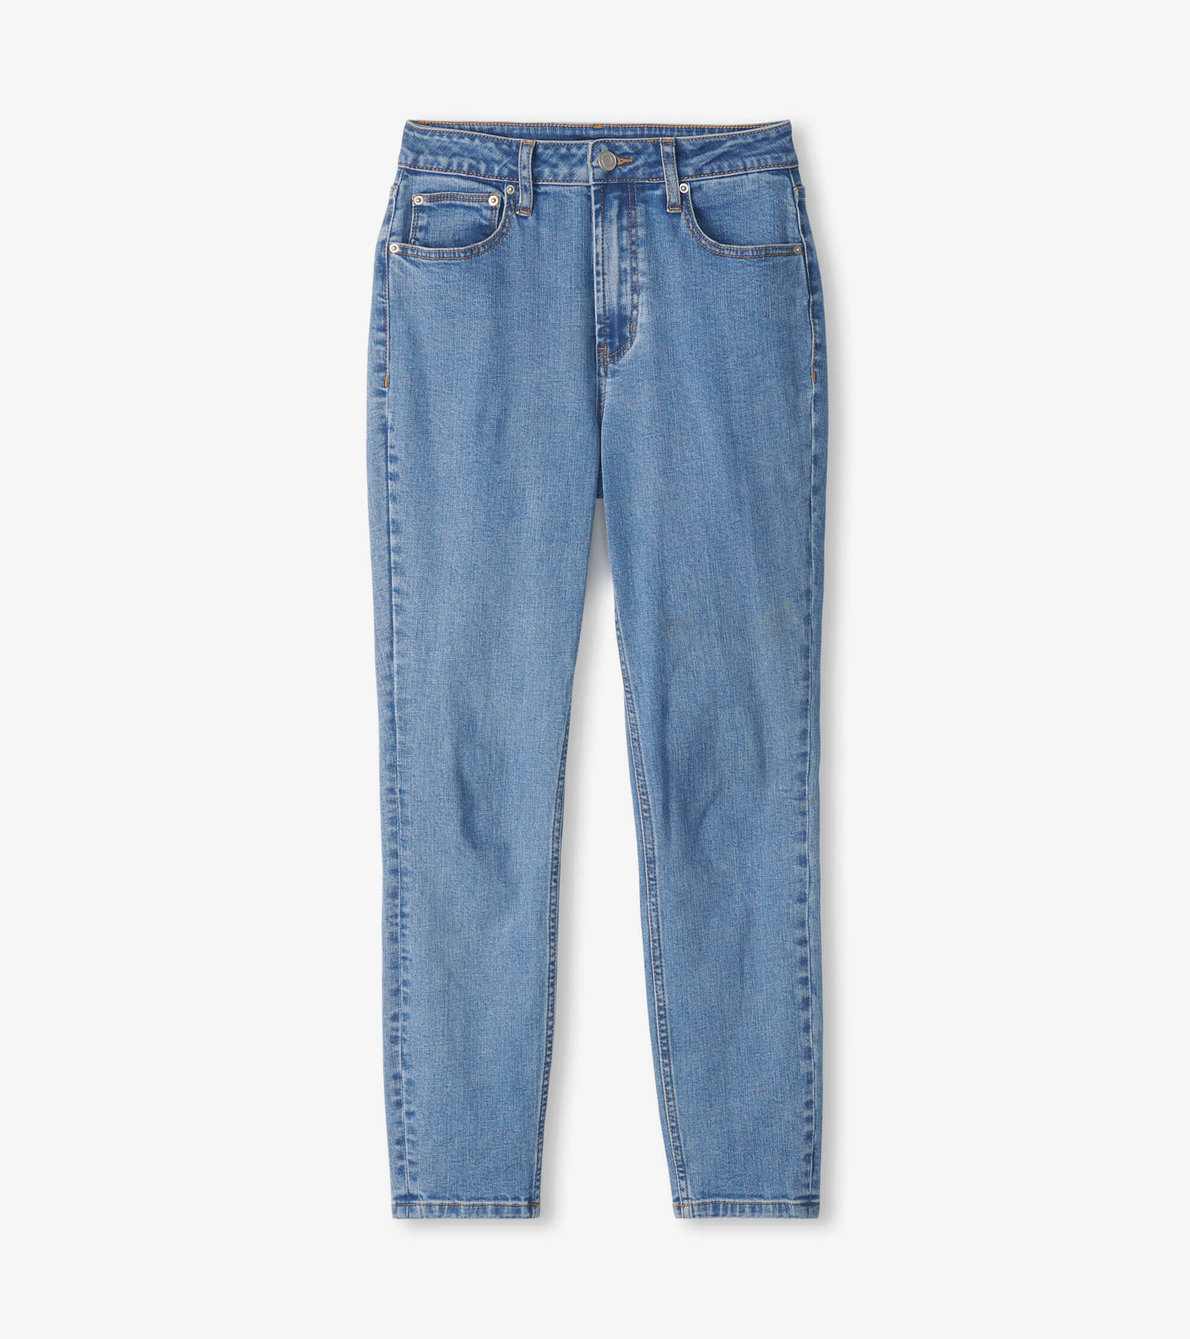 View larger image of Mid Rise Jeans - Blue Rinse